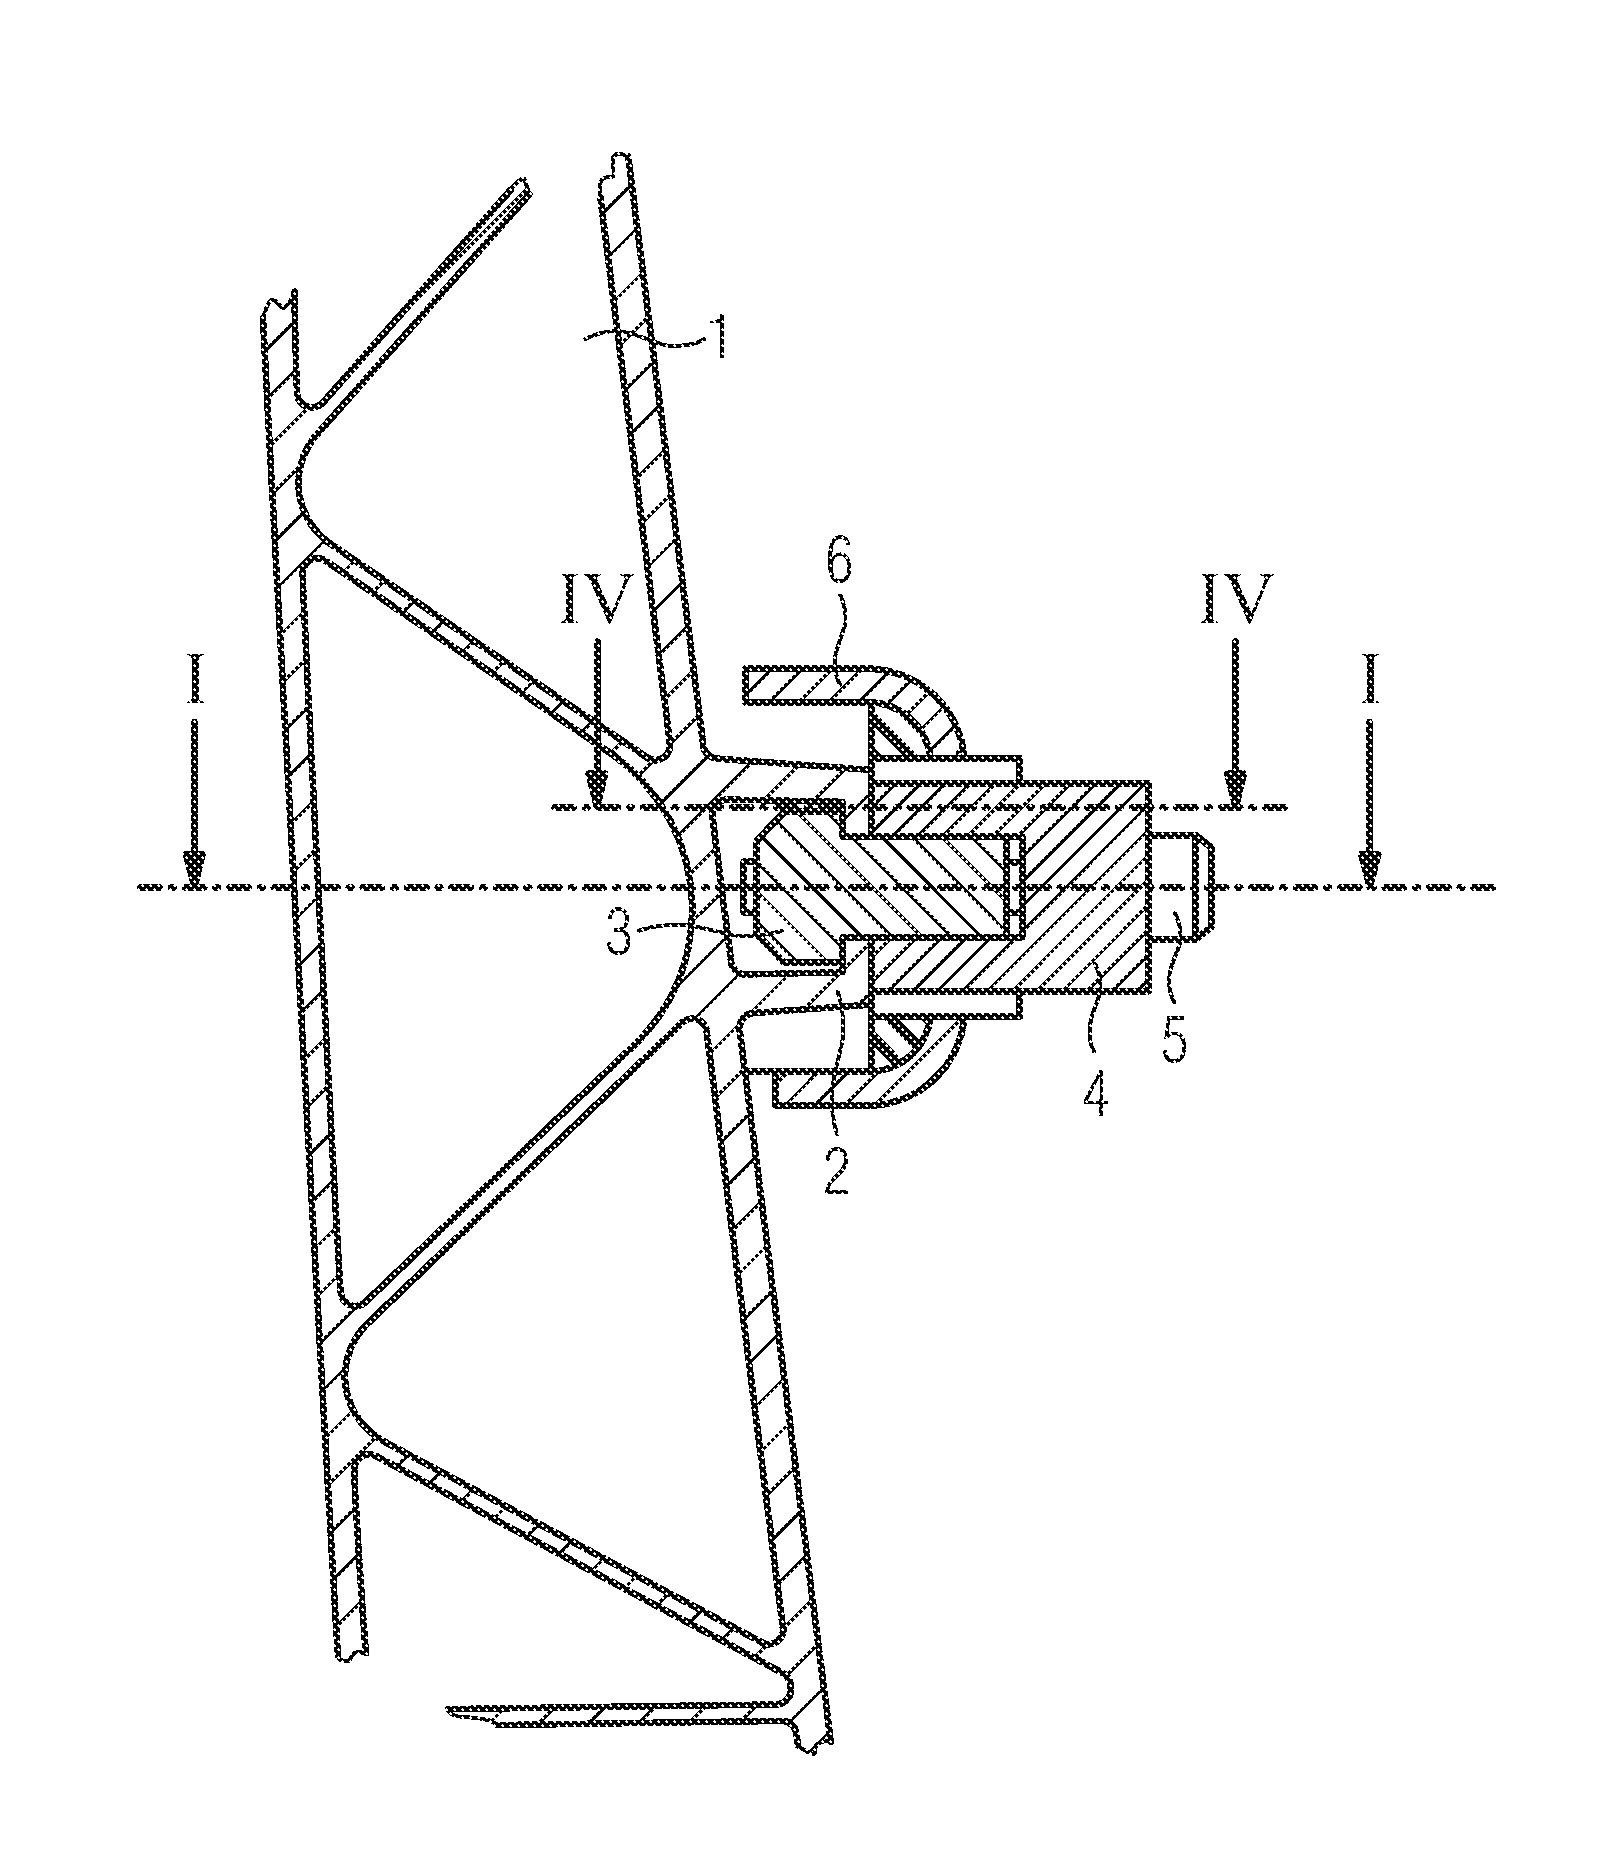 Fastening arrangement for a wall-supported and floor-supported element of an interior fitting of a vehicle